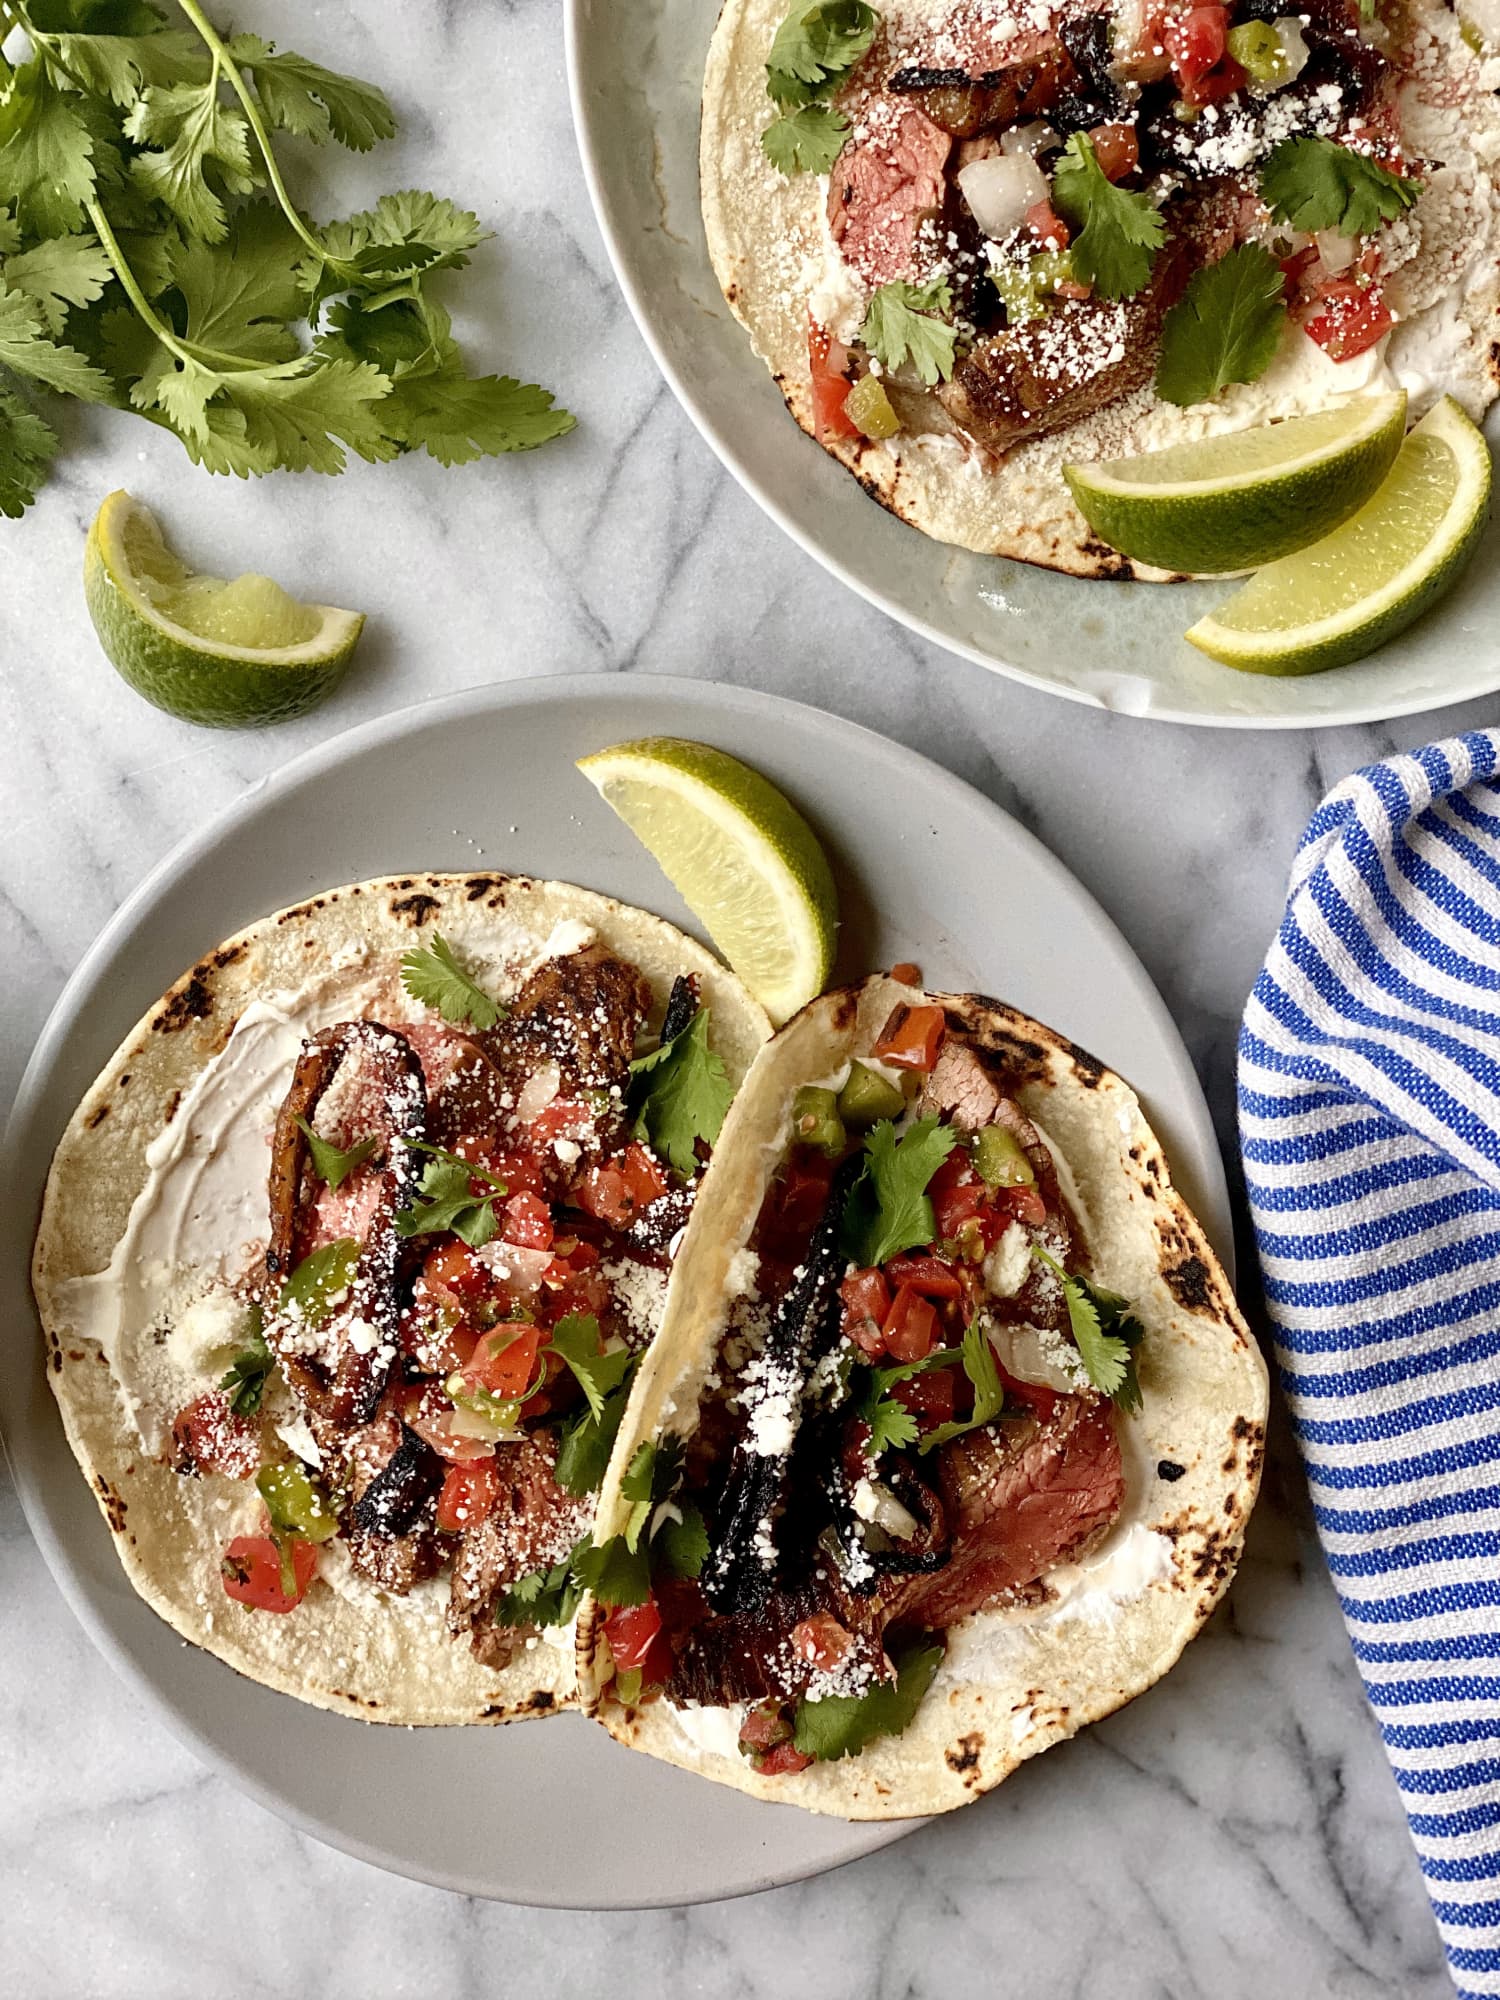 These Grilled Steak Tacos Take Me Back to the Tacos of My Youth in Southern California